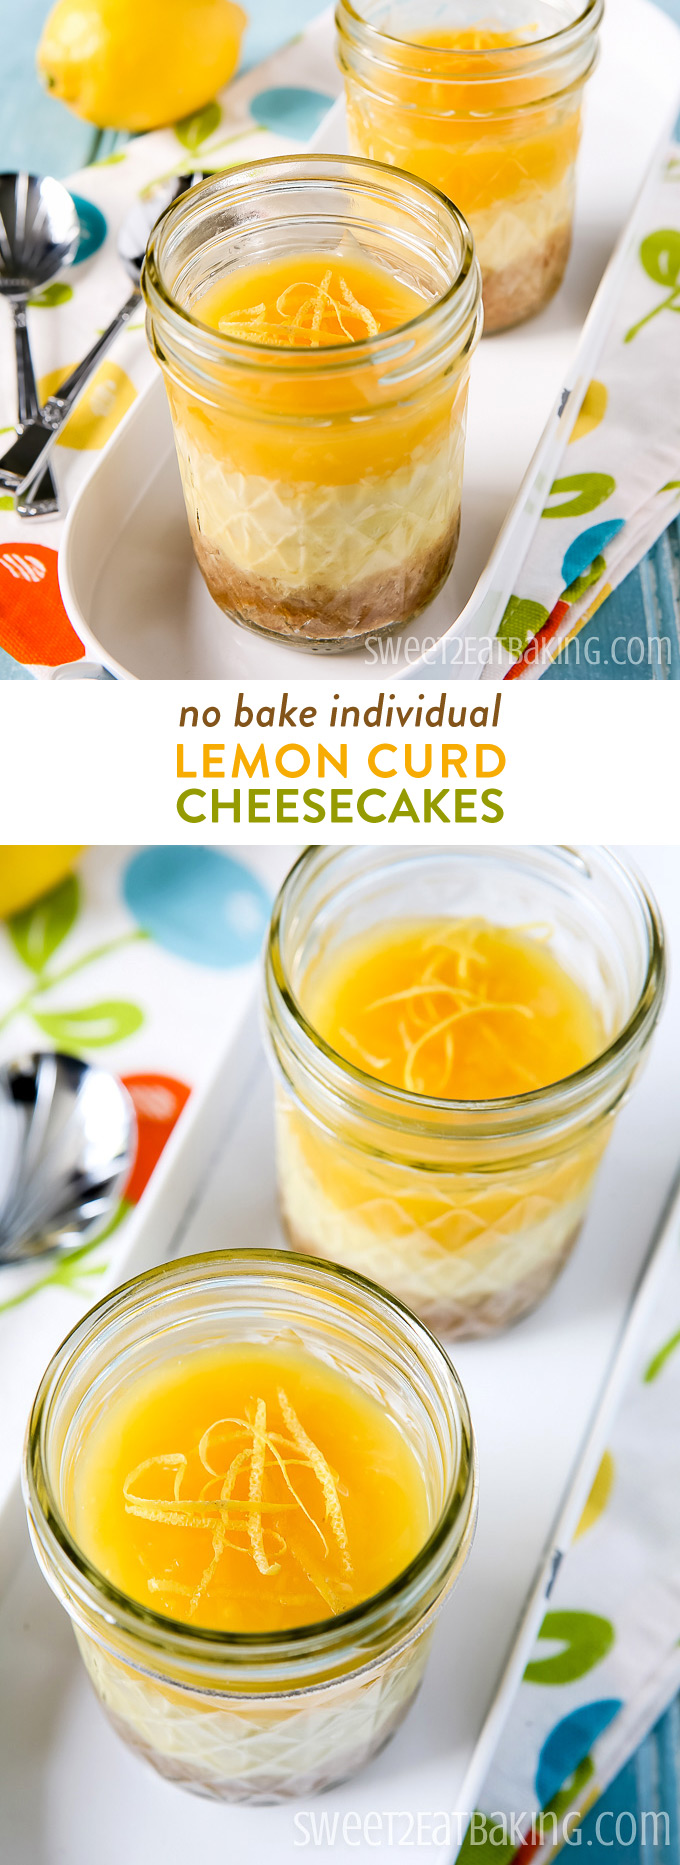 No Bake Individual Lemon Curd Cheesecakes Recipe by Sweet2EatBaking.com | These individual Lemon Curd Cheesecakes are so quick and easy to make. And can be made in around 5 minutes (excluding chilling time). Lemon curd cheesecakes are absolutely perfect for a refreshing treat this summer.